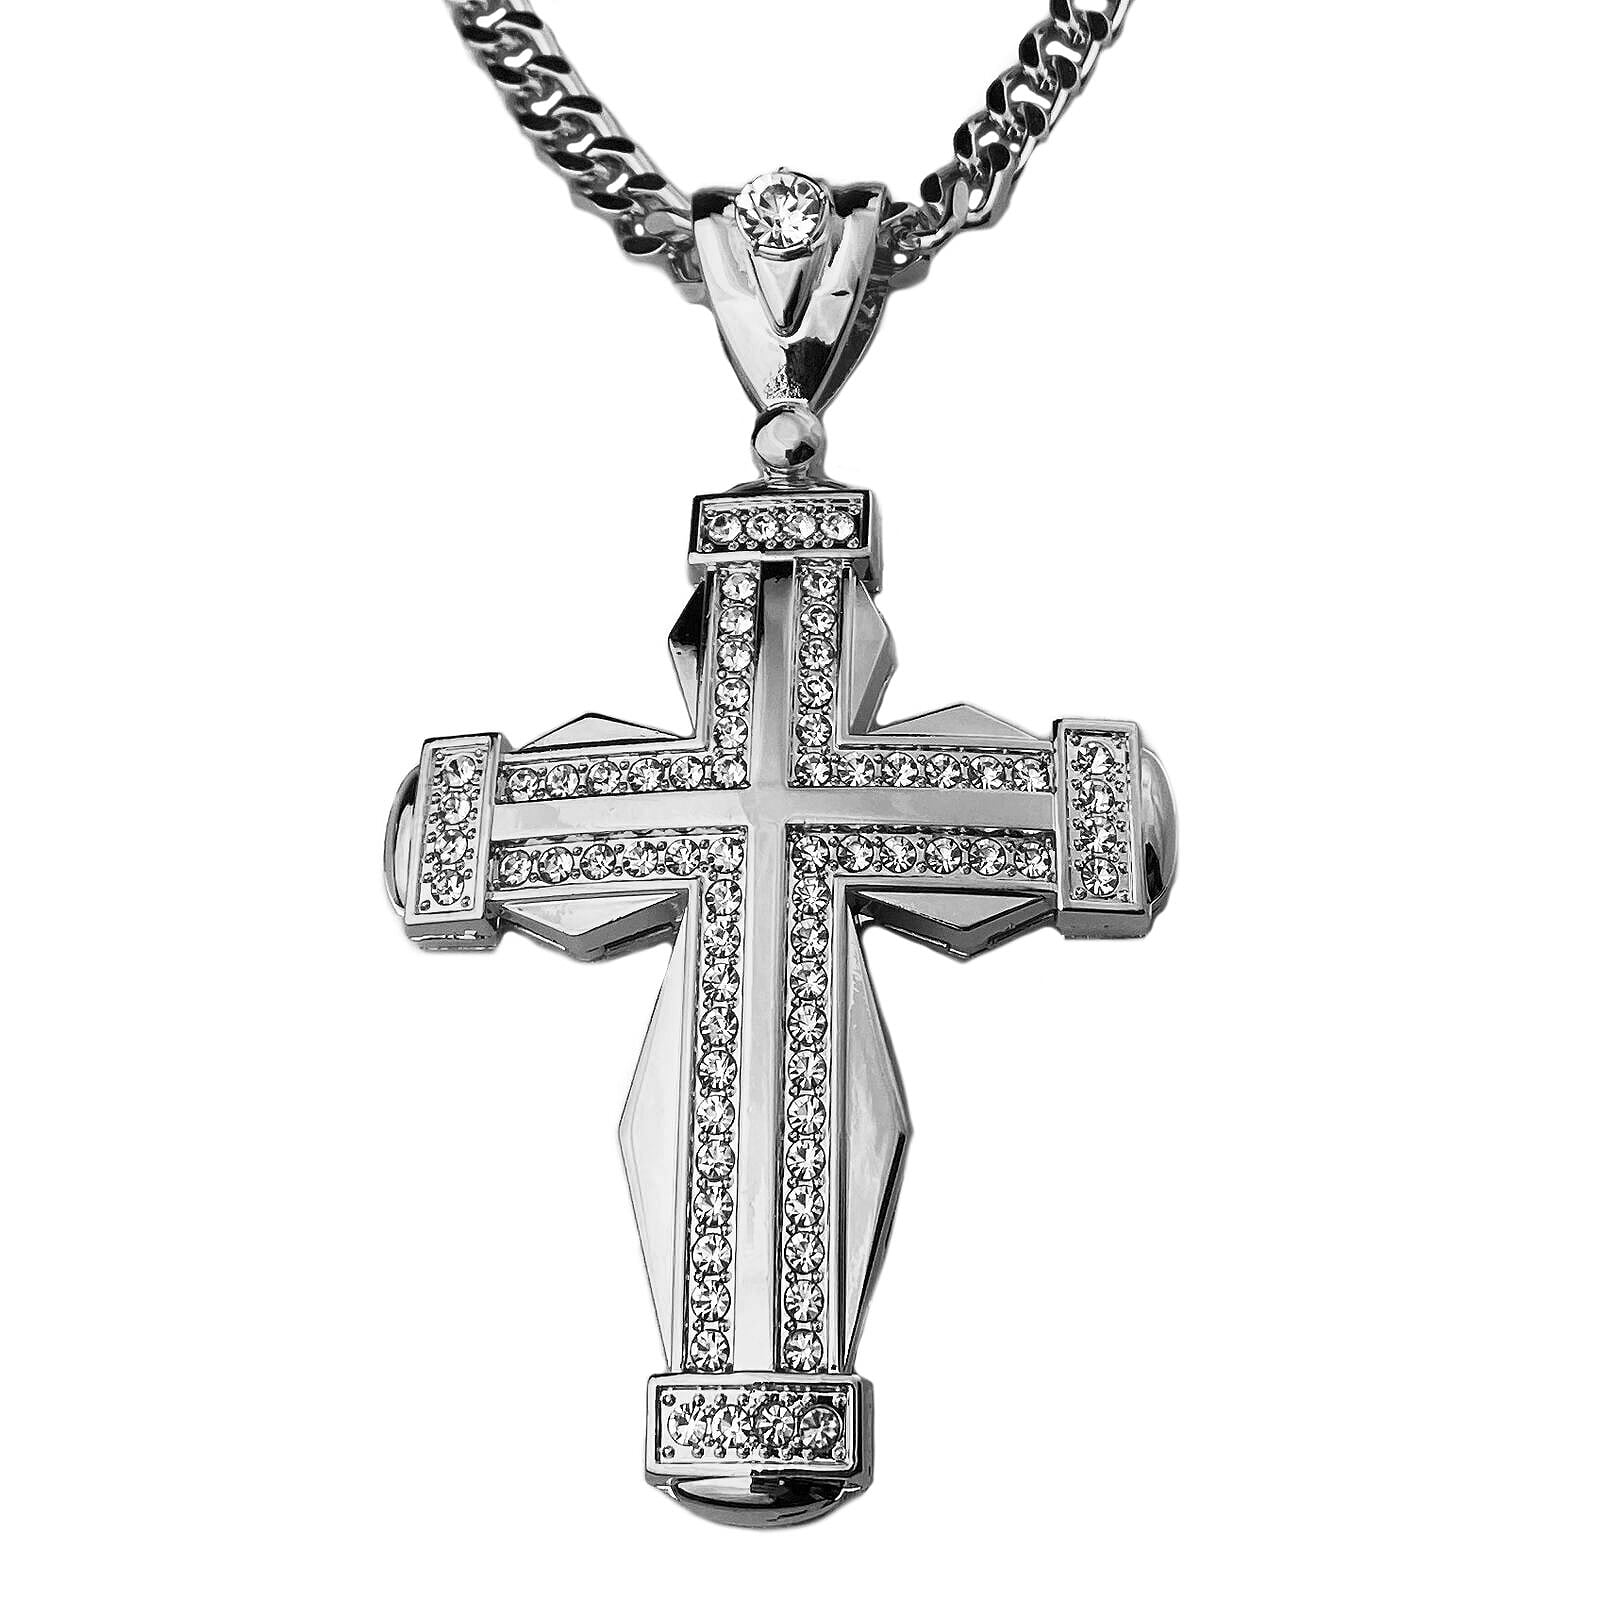 18K Gold Silver STAINLESS STEEL CROSS 2 JESUS Ball Chain Pendant HipHop Necklace 